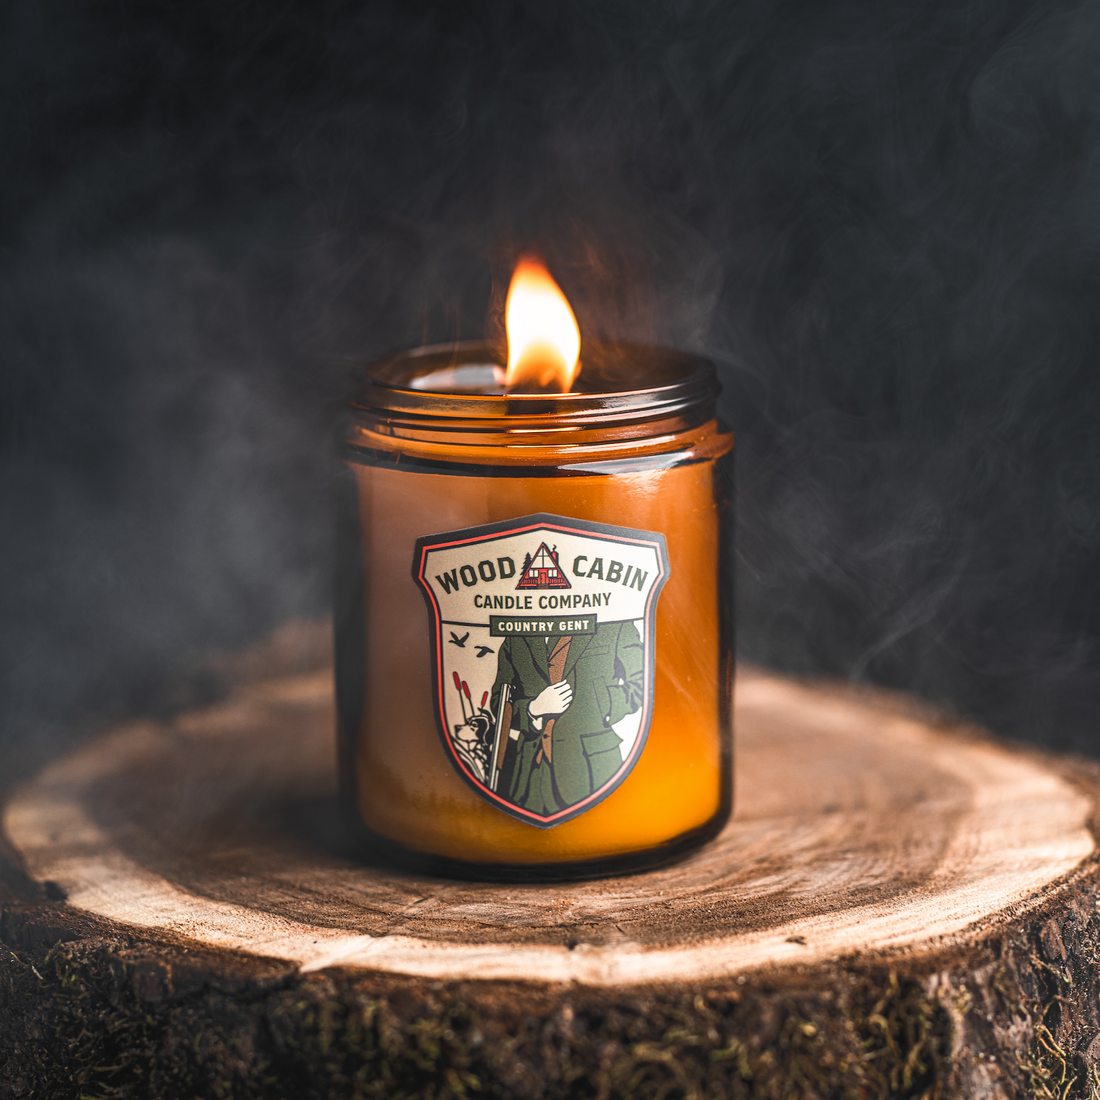 The Candles – Wood Cabin Candles